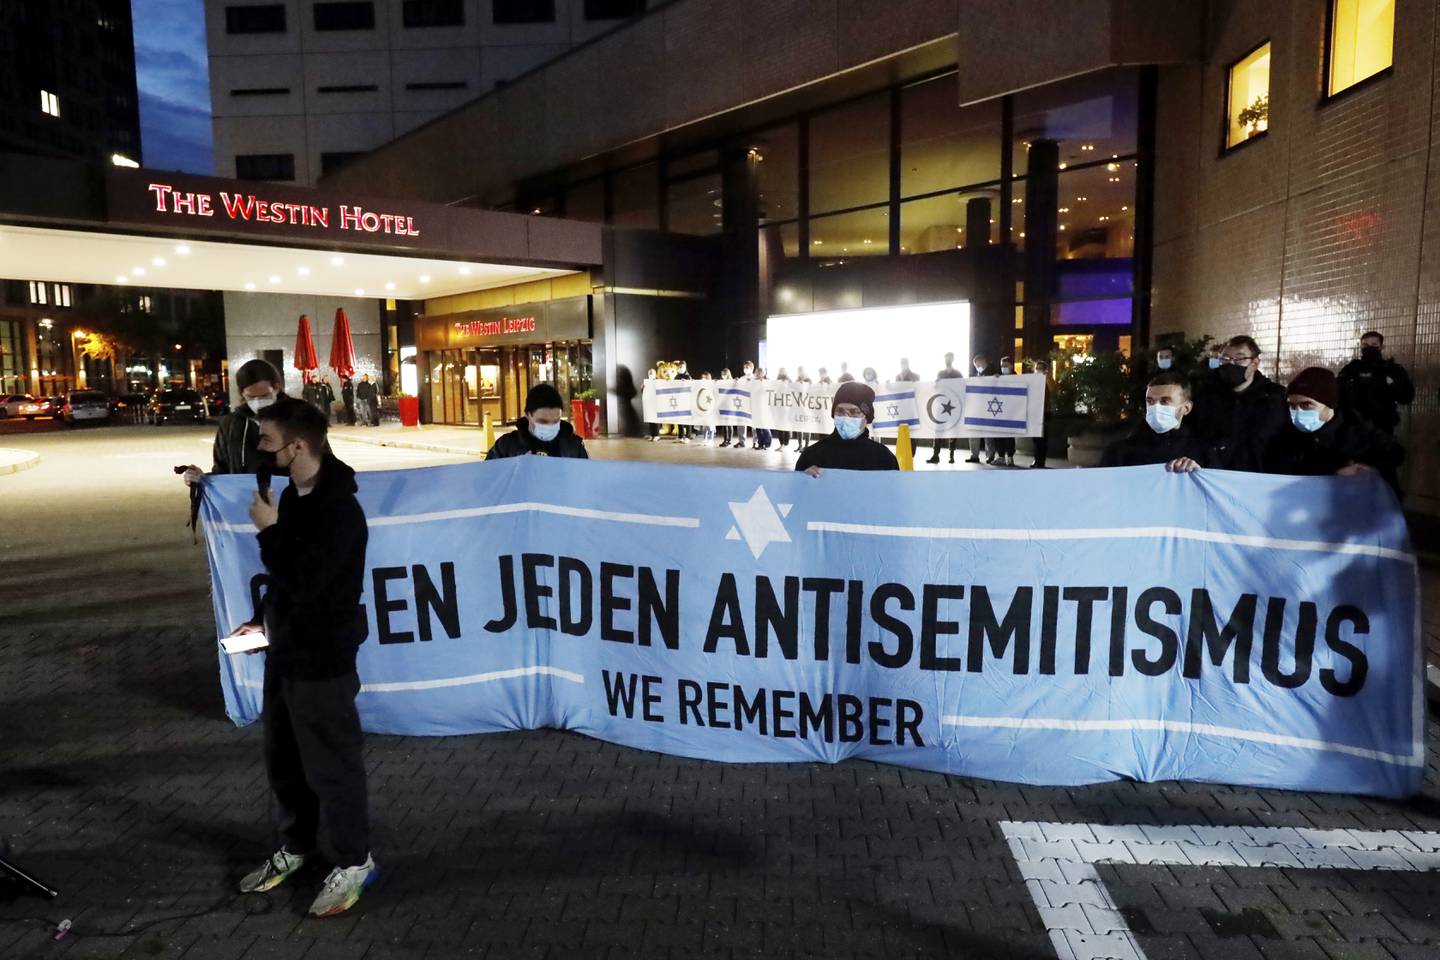 People gather in front of the "Westin Hotel" in Leipzig, Germany, Tuesday, Oct. 5, 2021 to show solidarity with the musician Gil Ofarim. A leading Jewish group in Germany says it's shocked by a German-Israeli singers report of being turned away from a hotel because he was wearing a Star of David pendant. Singer Gil Ofarim, who lives in Germany, shared a video on Instagram Tuesday showing him in front of the Westin hotel in Leipzig and saying a hotel employee asked him to put away his necklace in order to check in. (Dirk Knofe/dpa via AP)